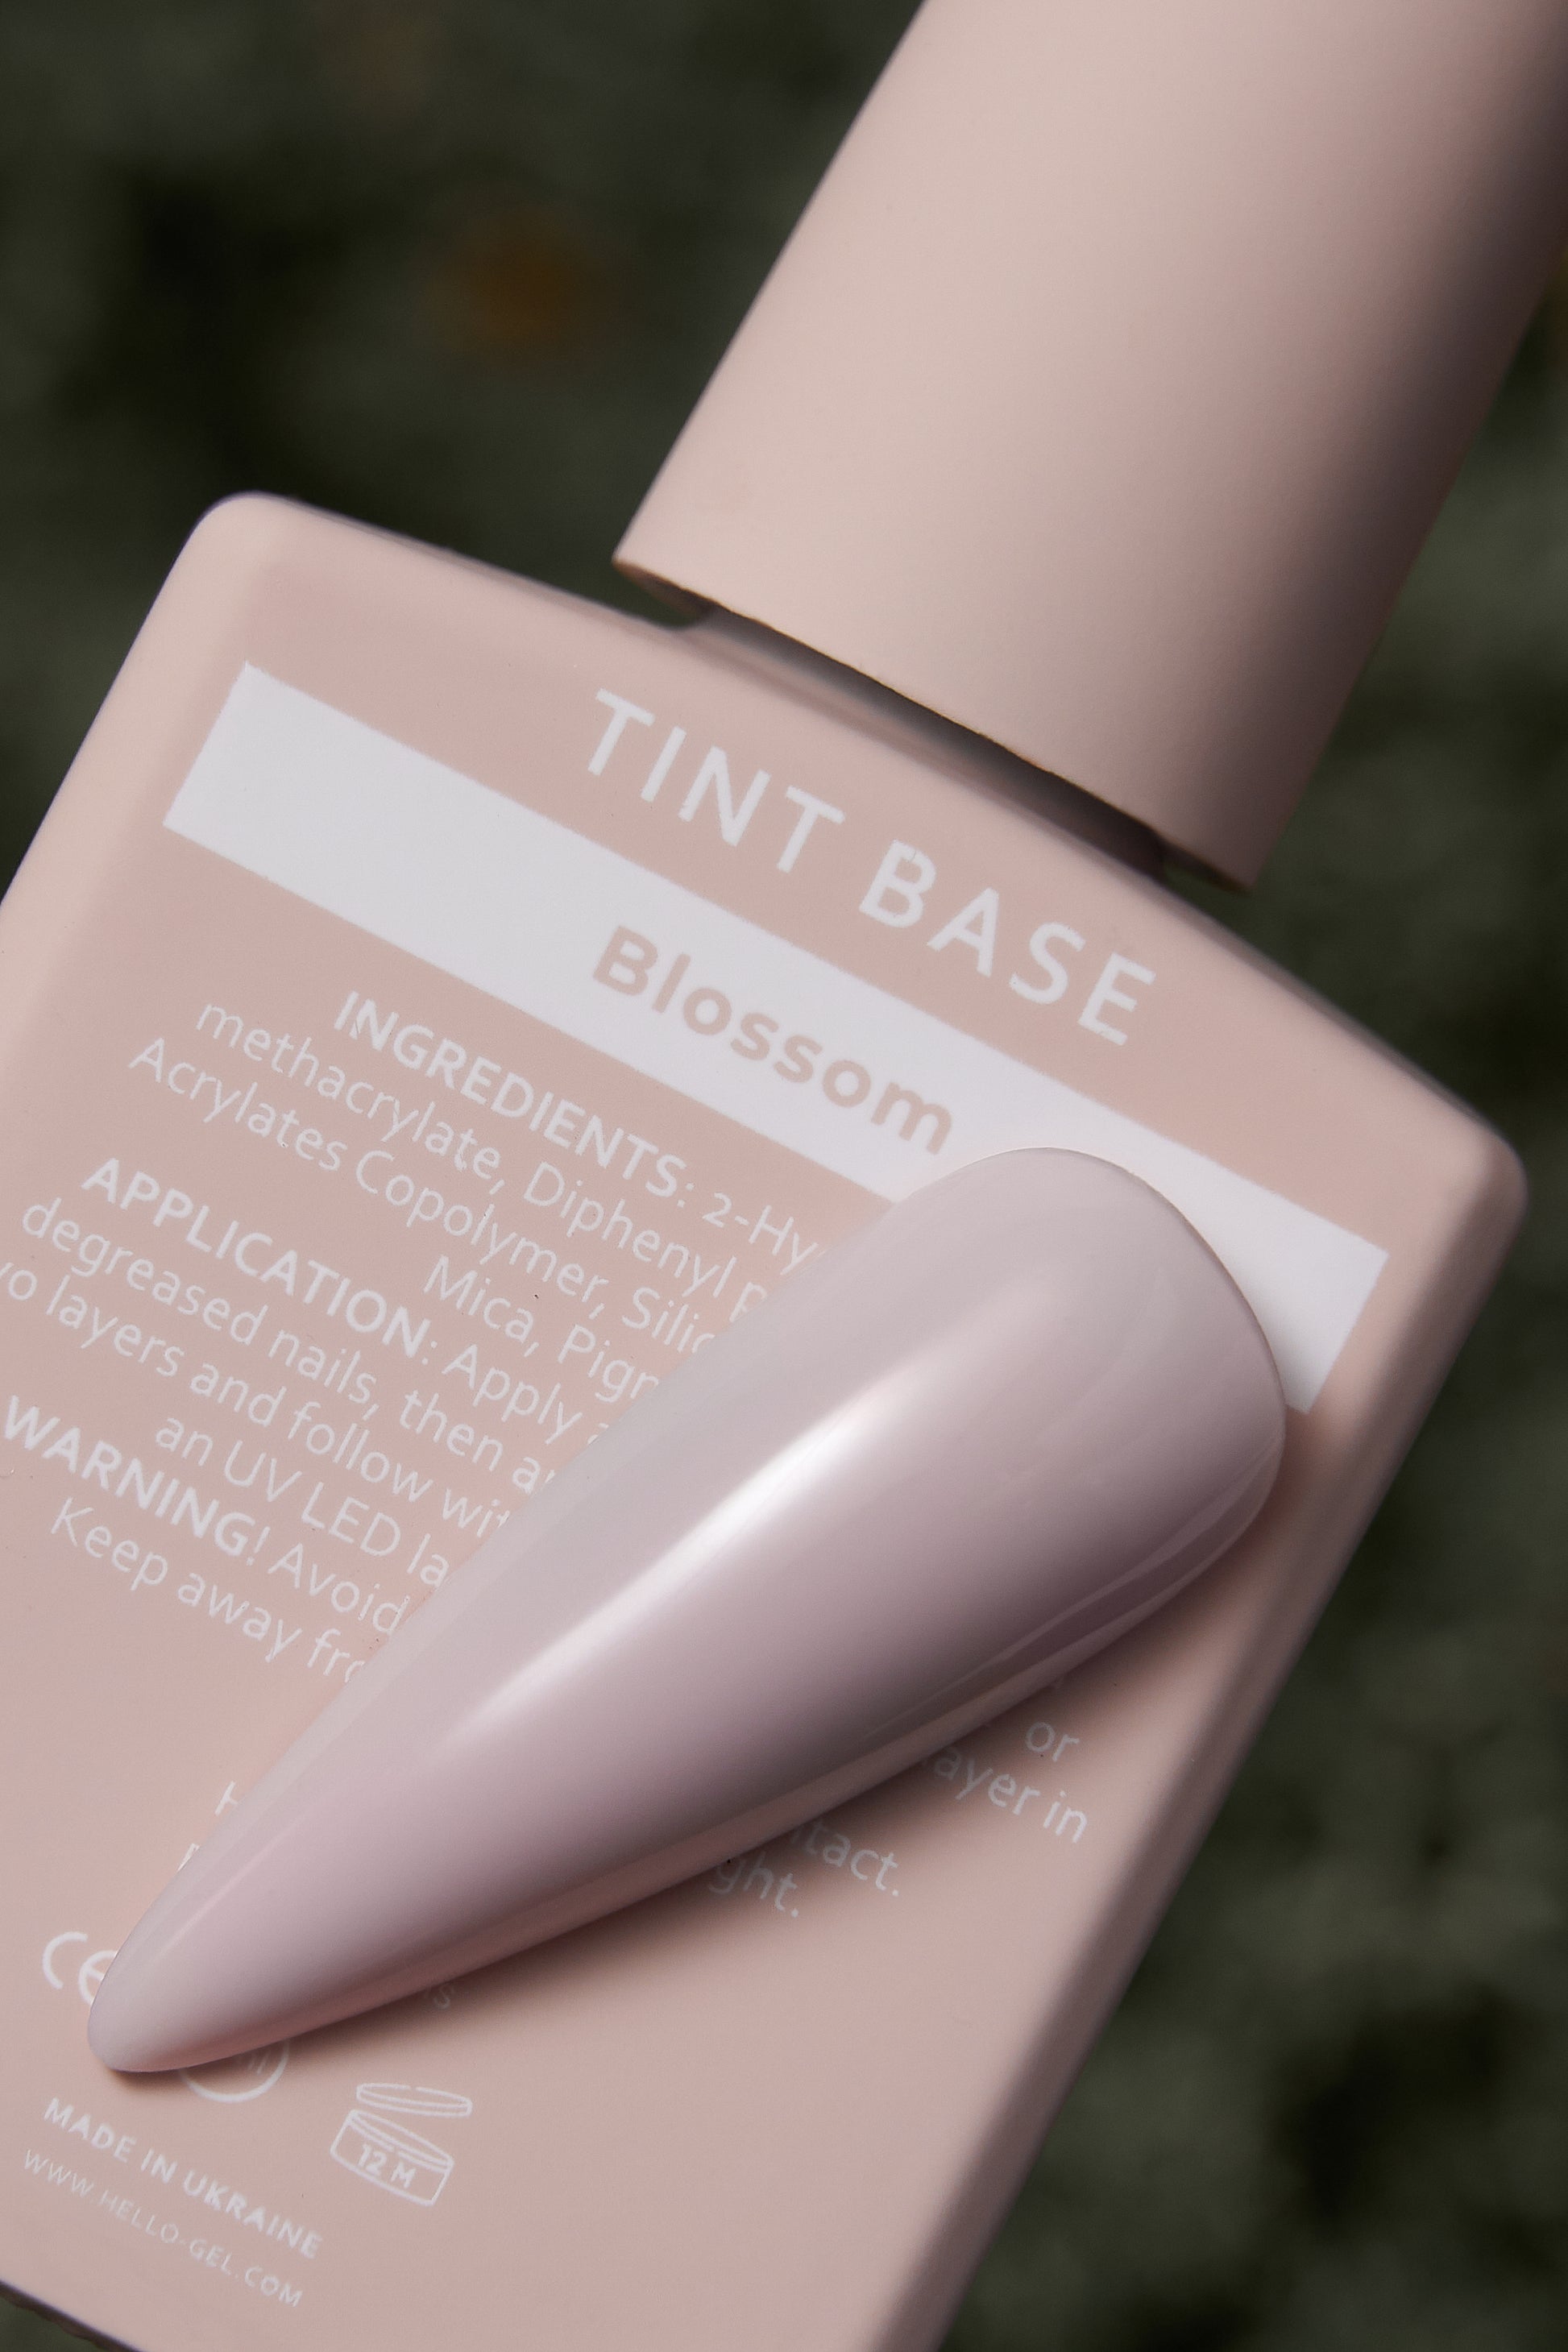 HELLO Tint base BLOSSOM. Color: Beige